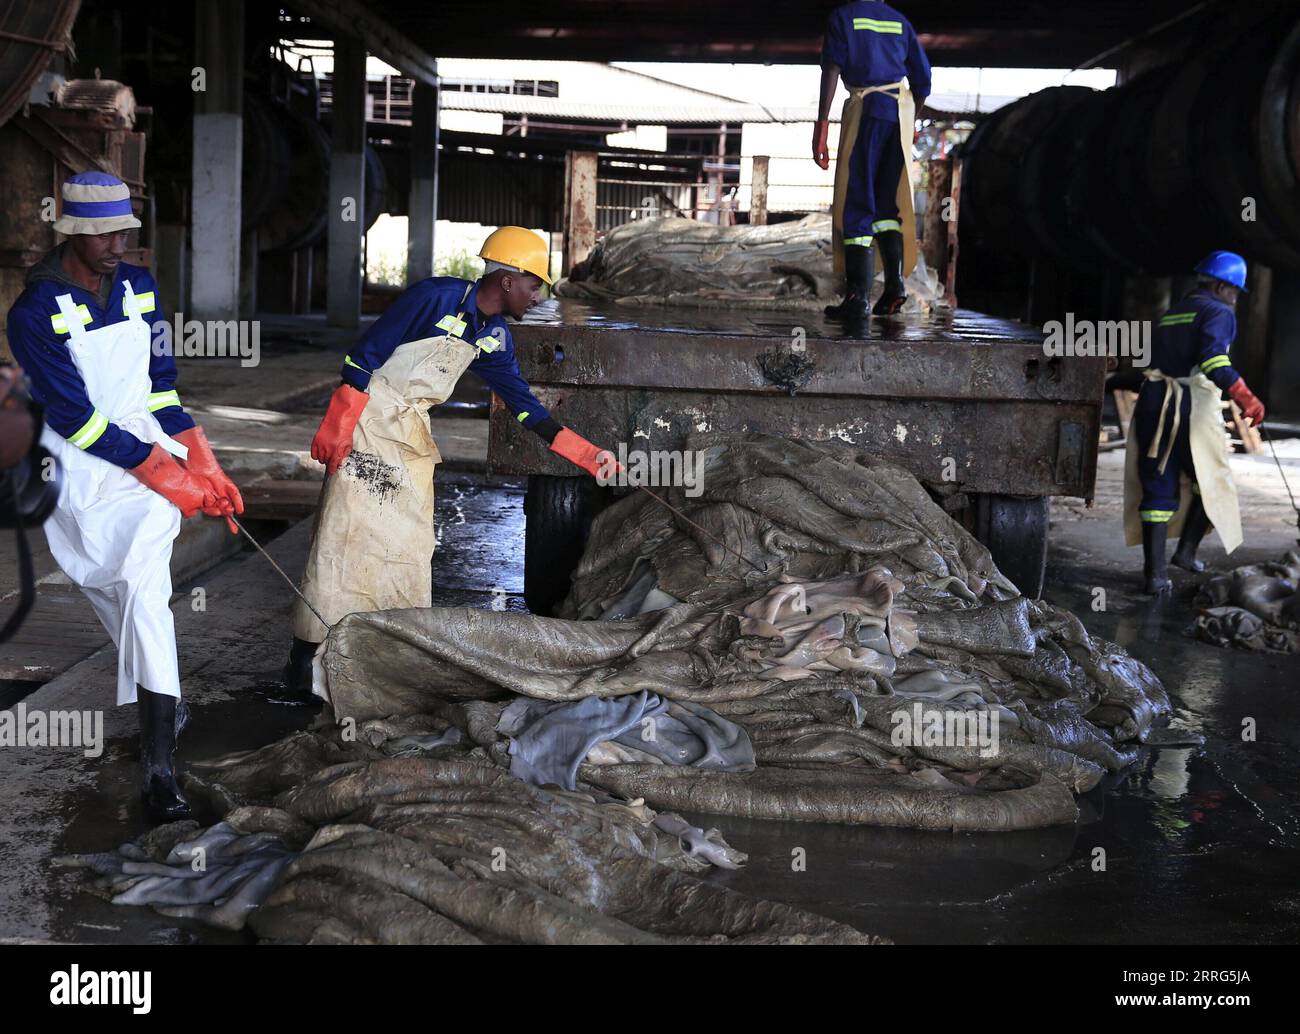 220509 -- BULAWAYO ZIMBABWE, May 9, 2022 -- Bongani Sibanda 2nd L and his colleagues load cow hides onto a trailer at a tannery in Bulawayo, Zimbabwe, on May 3, 2022. Photo by /Xinhua TO GO WITH Feature: Generational inheritance keeps leather making tradition alive in Zimbabwe ZIMBABWE-BULAWAYO-LEATHER INDUSTRY ShaunxJusa PUBLICATIONxNOTxINxCHN Stock Photo